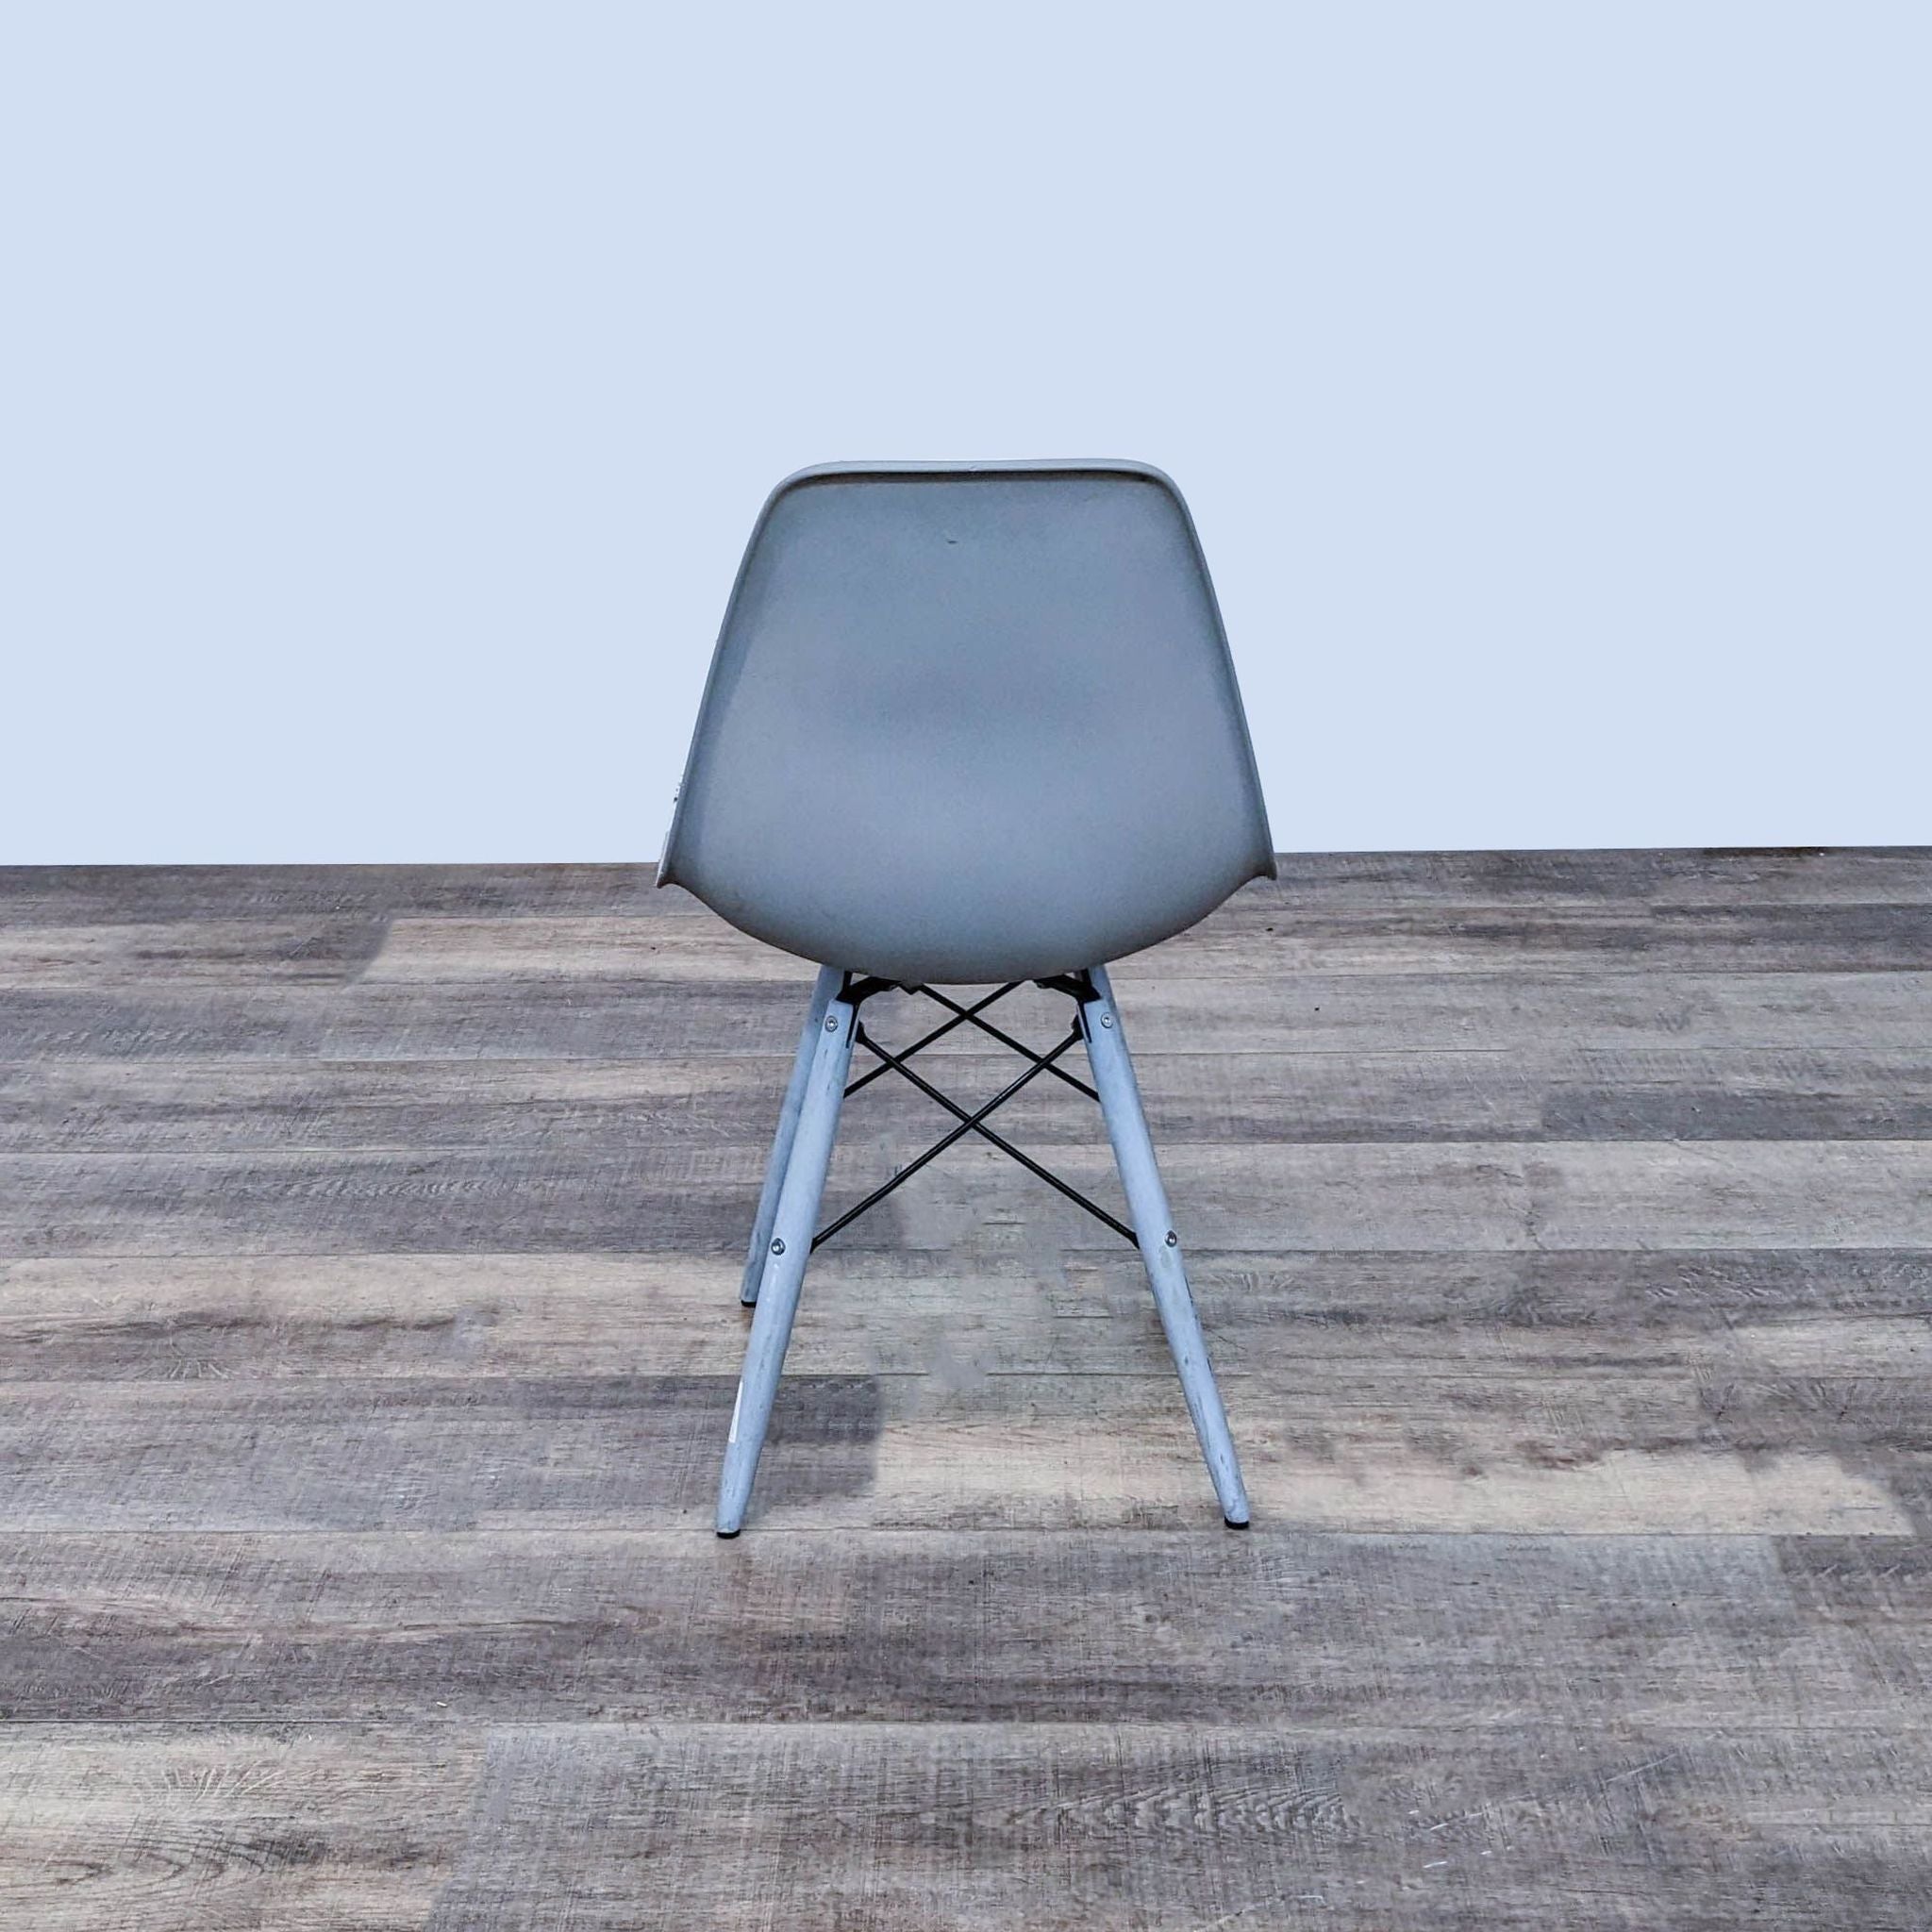 Reperch brand dining chair with a contoured two-toned plastic seat and wooden legs with a metal Eiffel base on a wooden floor.